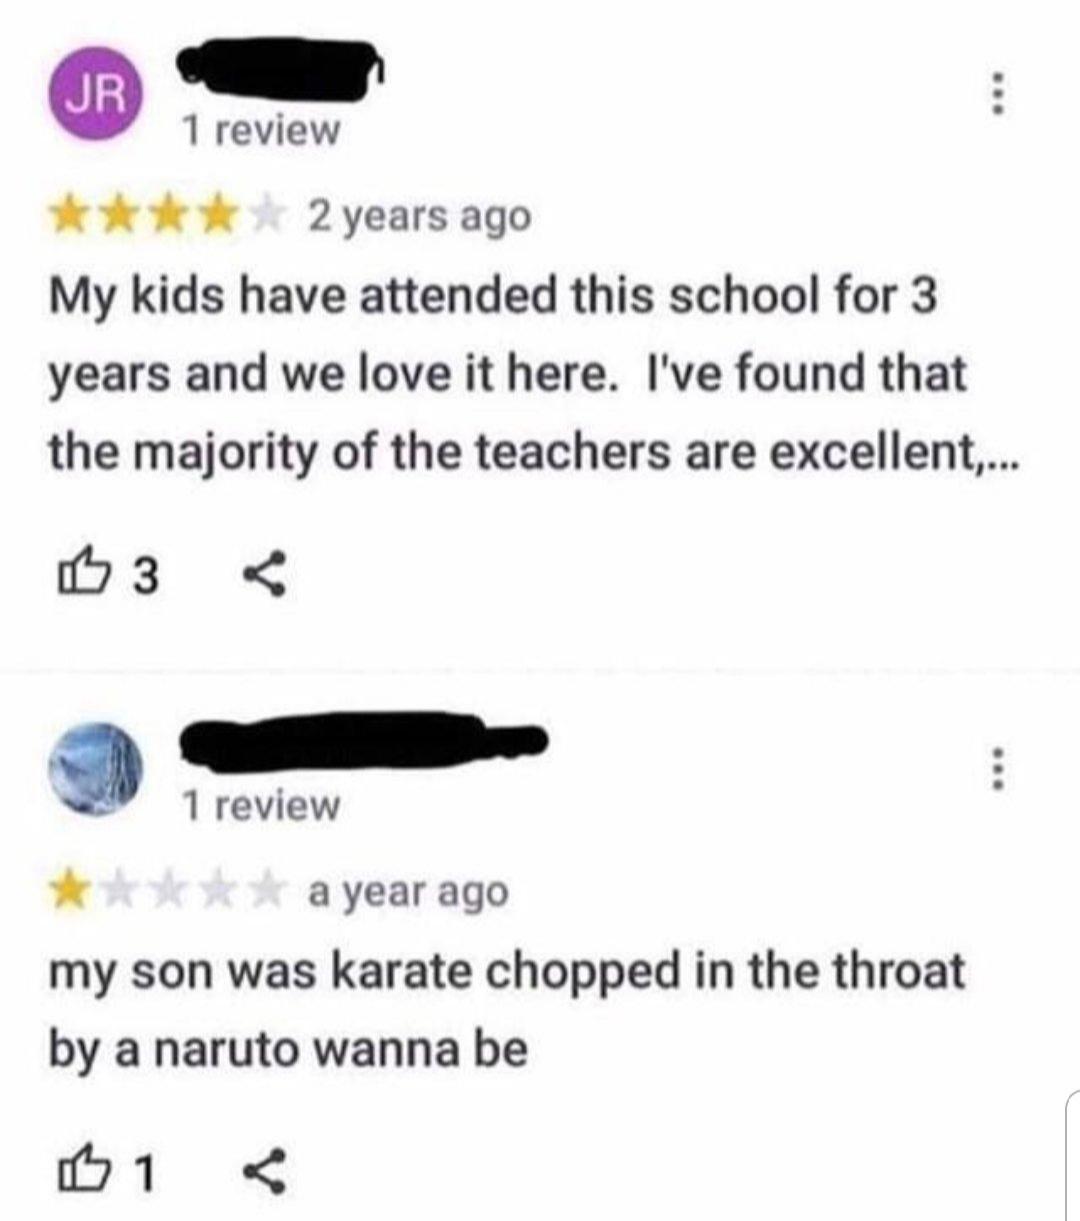 my son was karate chopped by a naruto wanna be - Jr 1 review 2 years ago My kids have attended this school for 3 years and we love it here. I've found that the majority of the teachers are excellent.... B35 1 review a year ago my son was karate chopped in